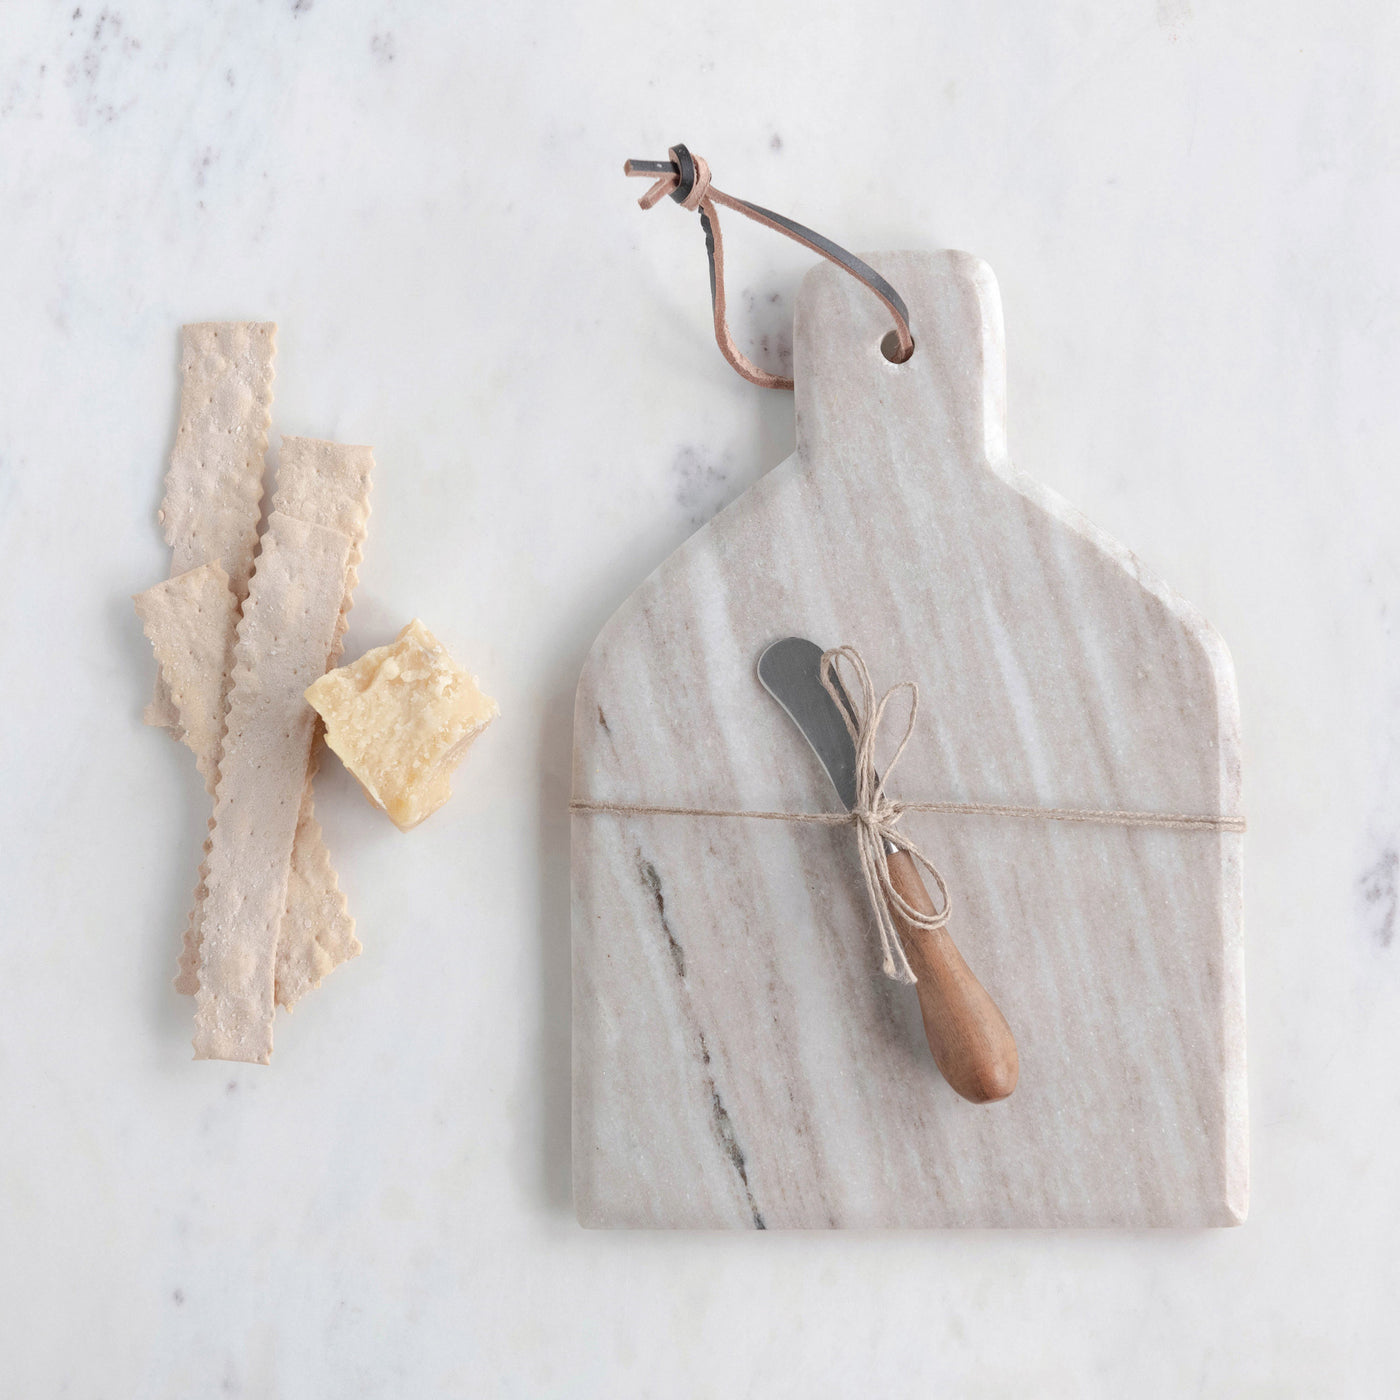 Cheese/Cutting Board with Canape Knife